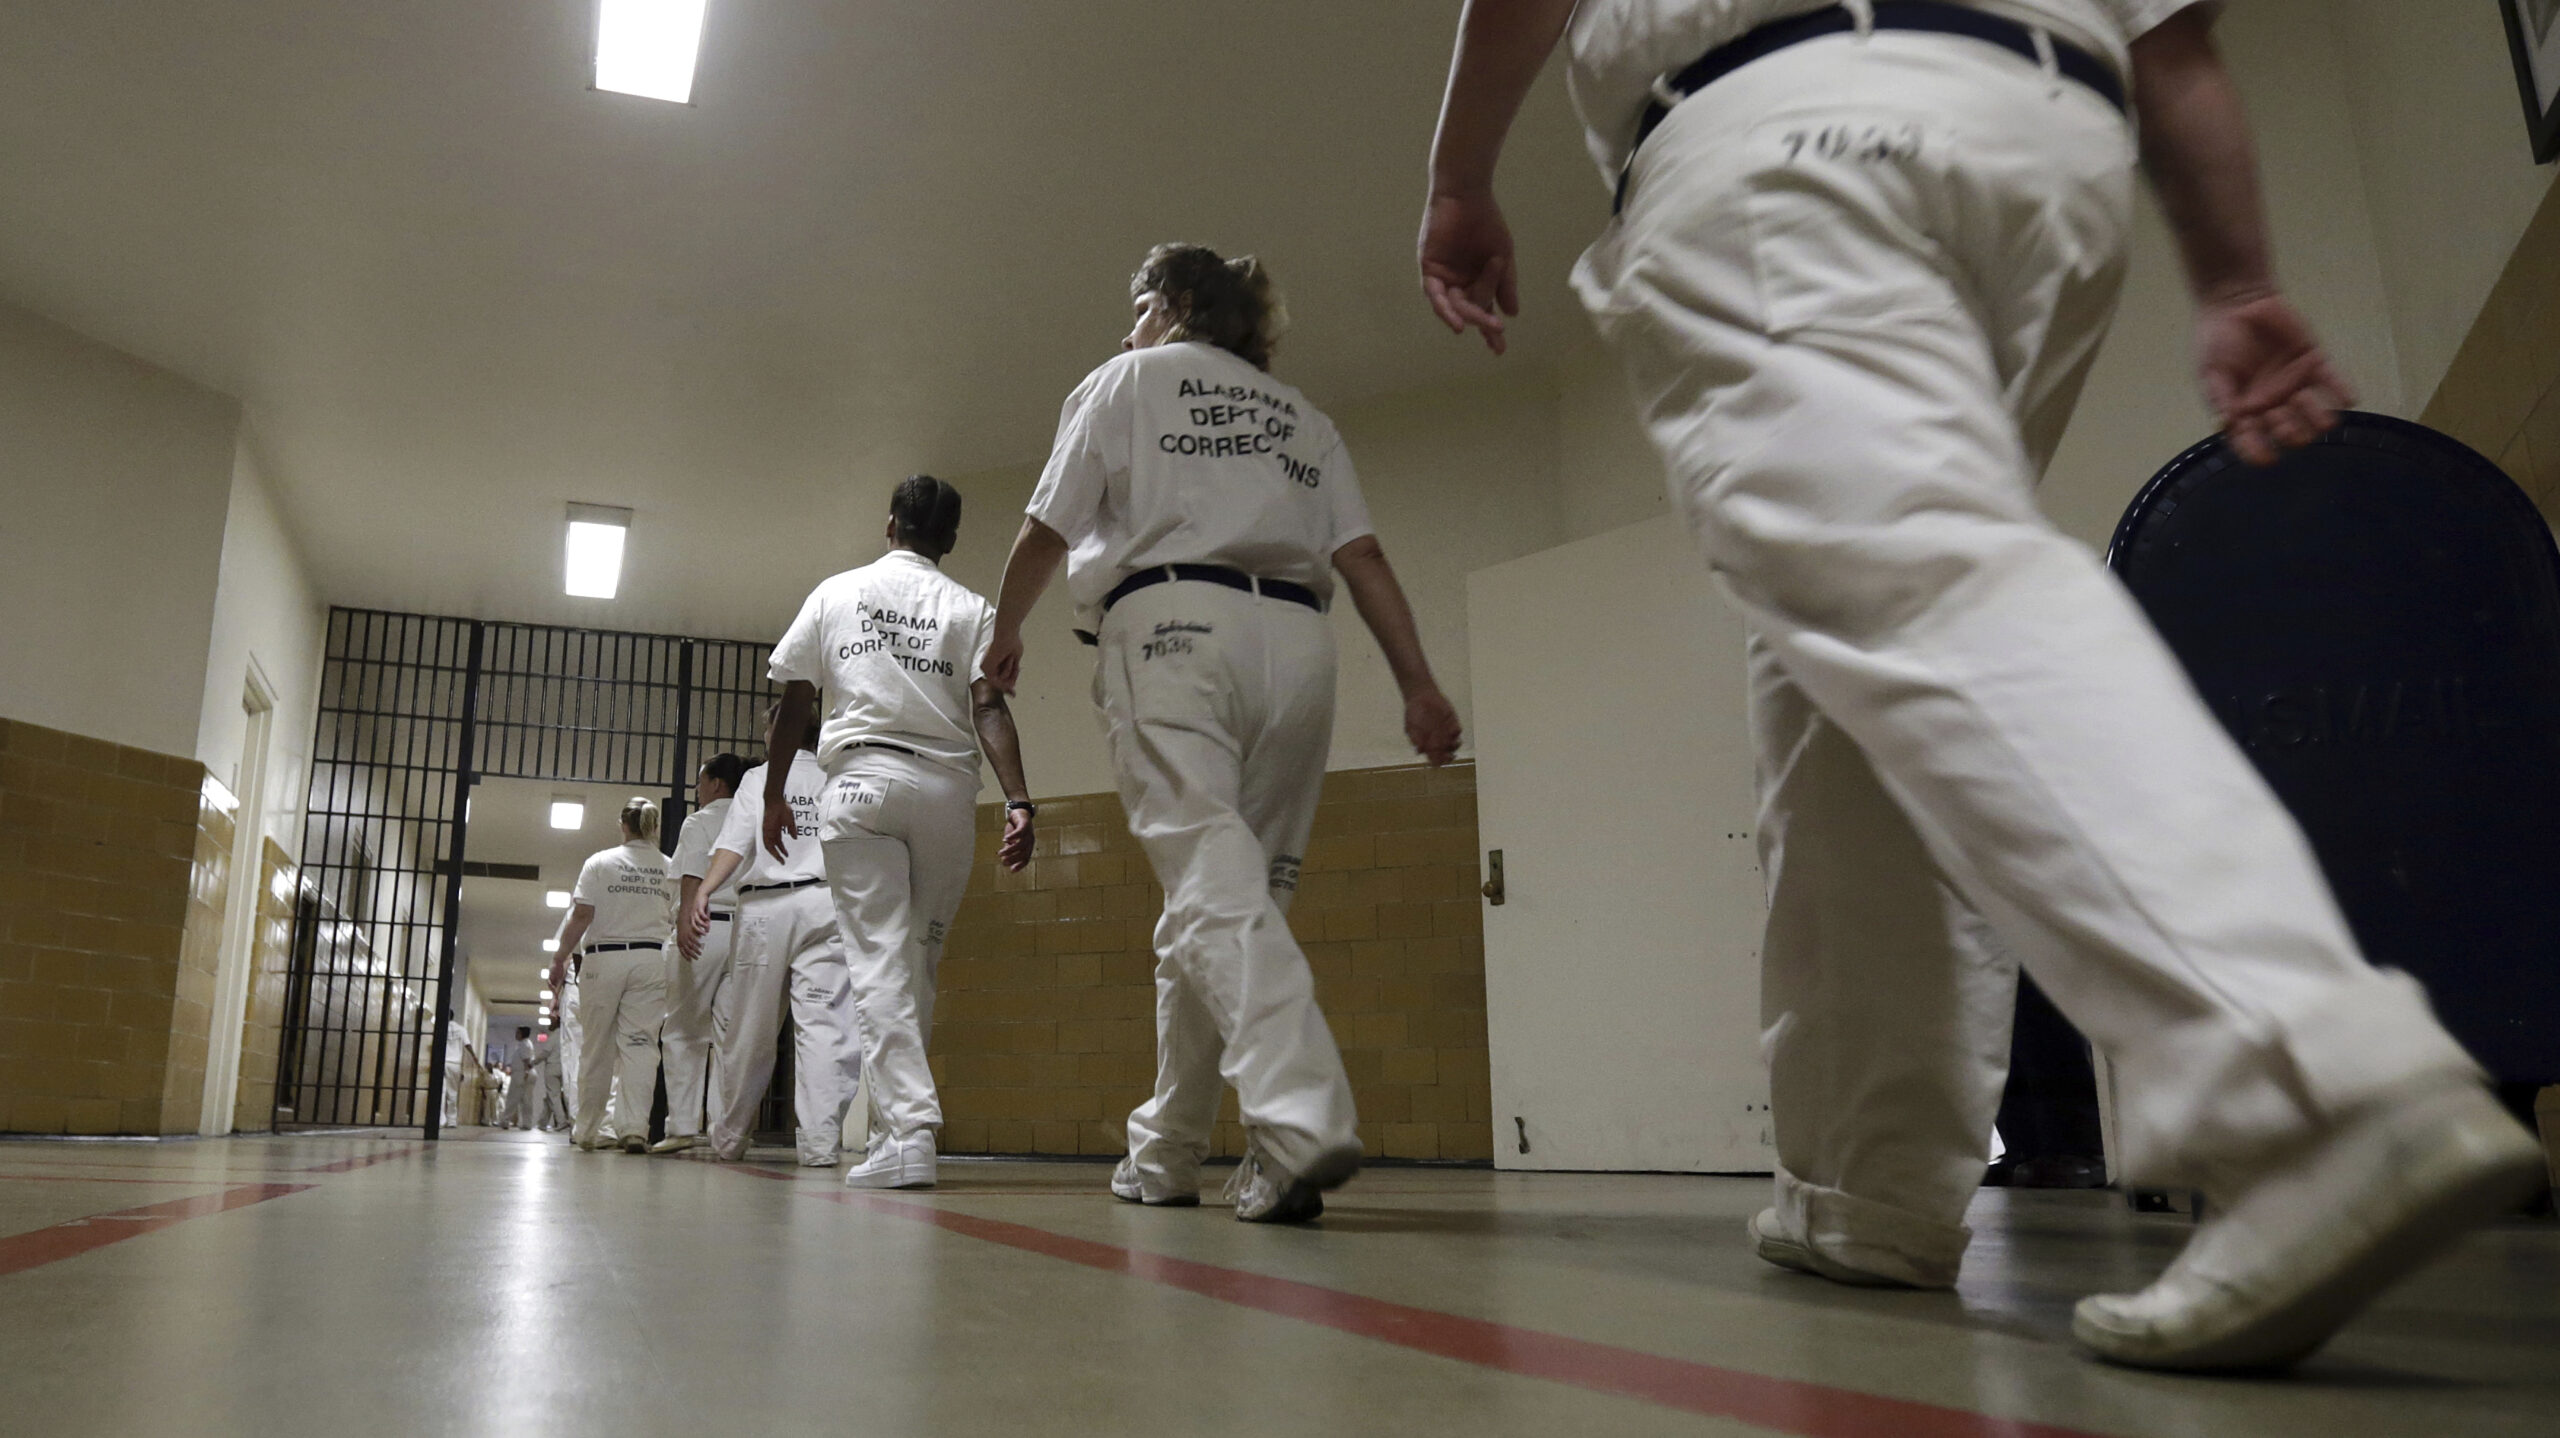 Prisoners are suing Alabama over forced labor, calling it a ‘form of slavery’